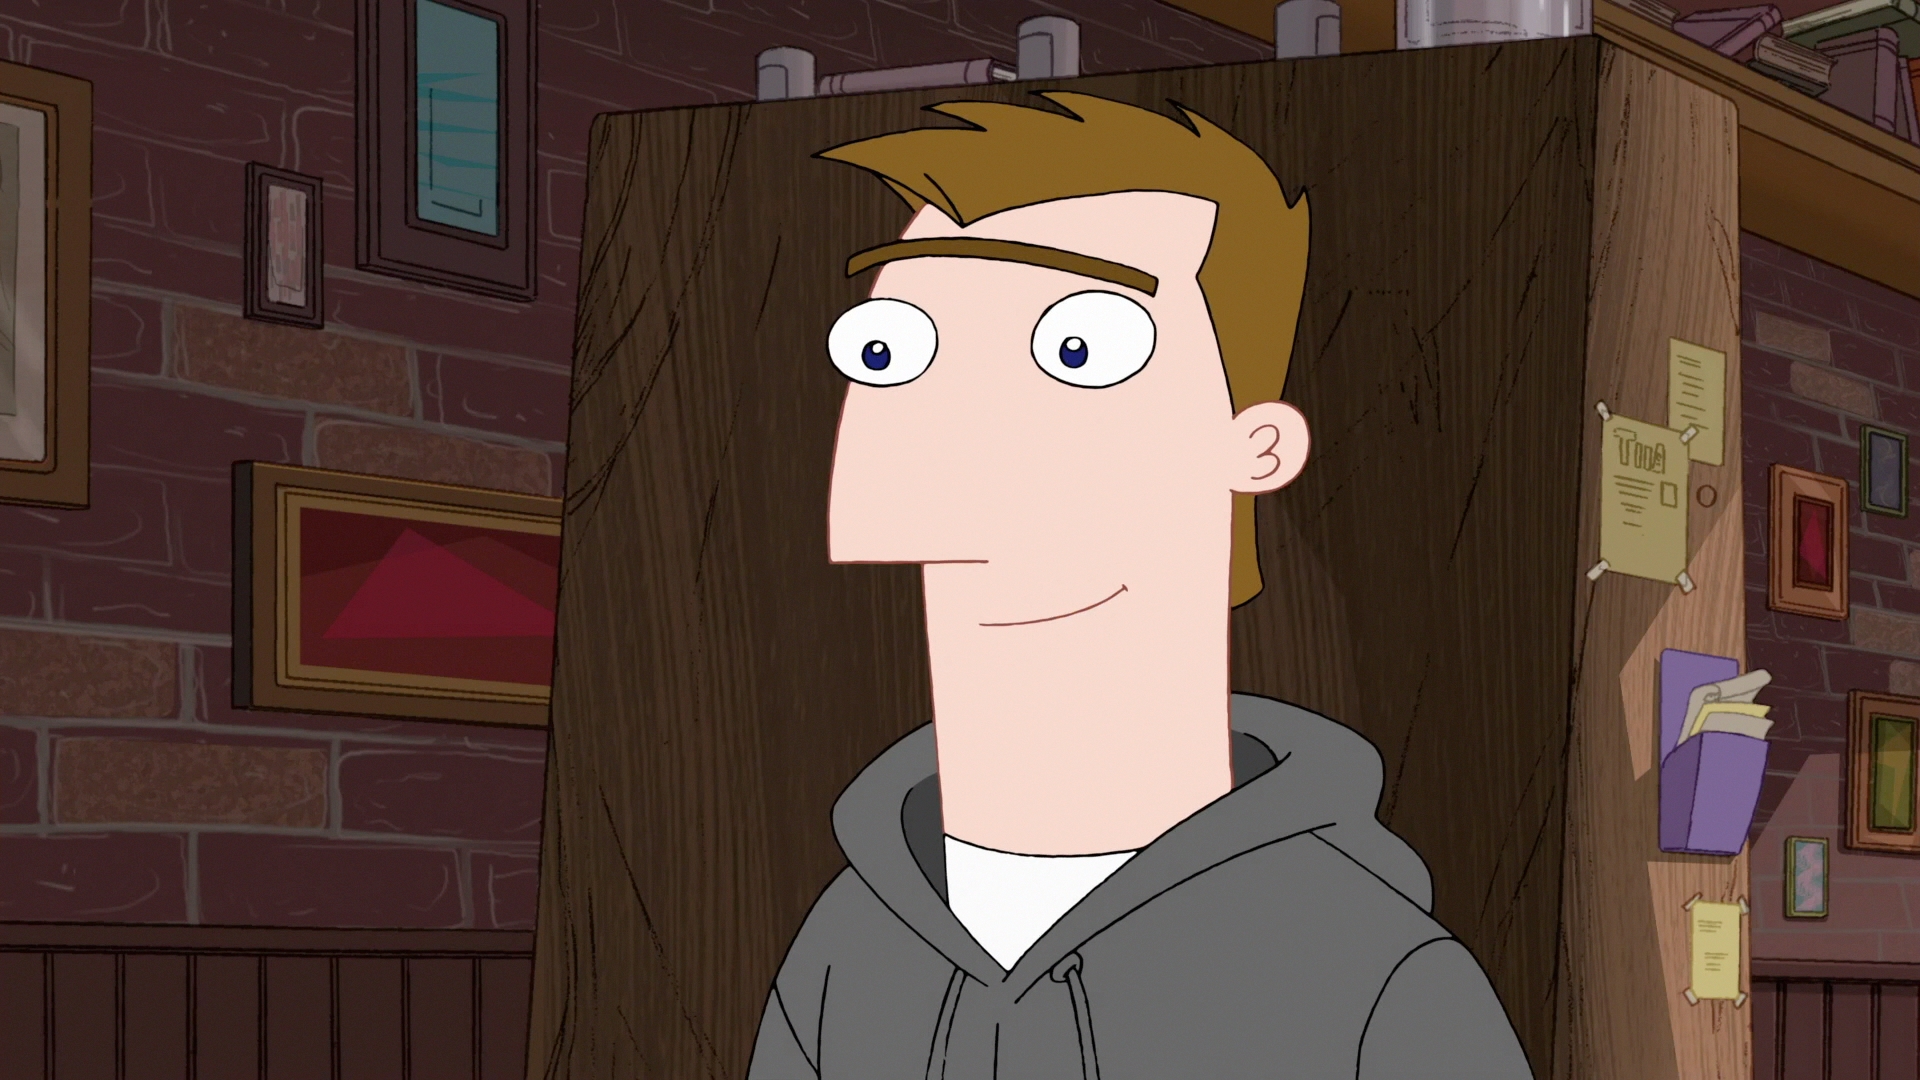 Who is Monty in Phineas and Ferb?